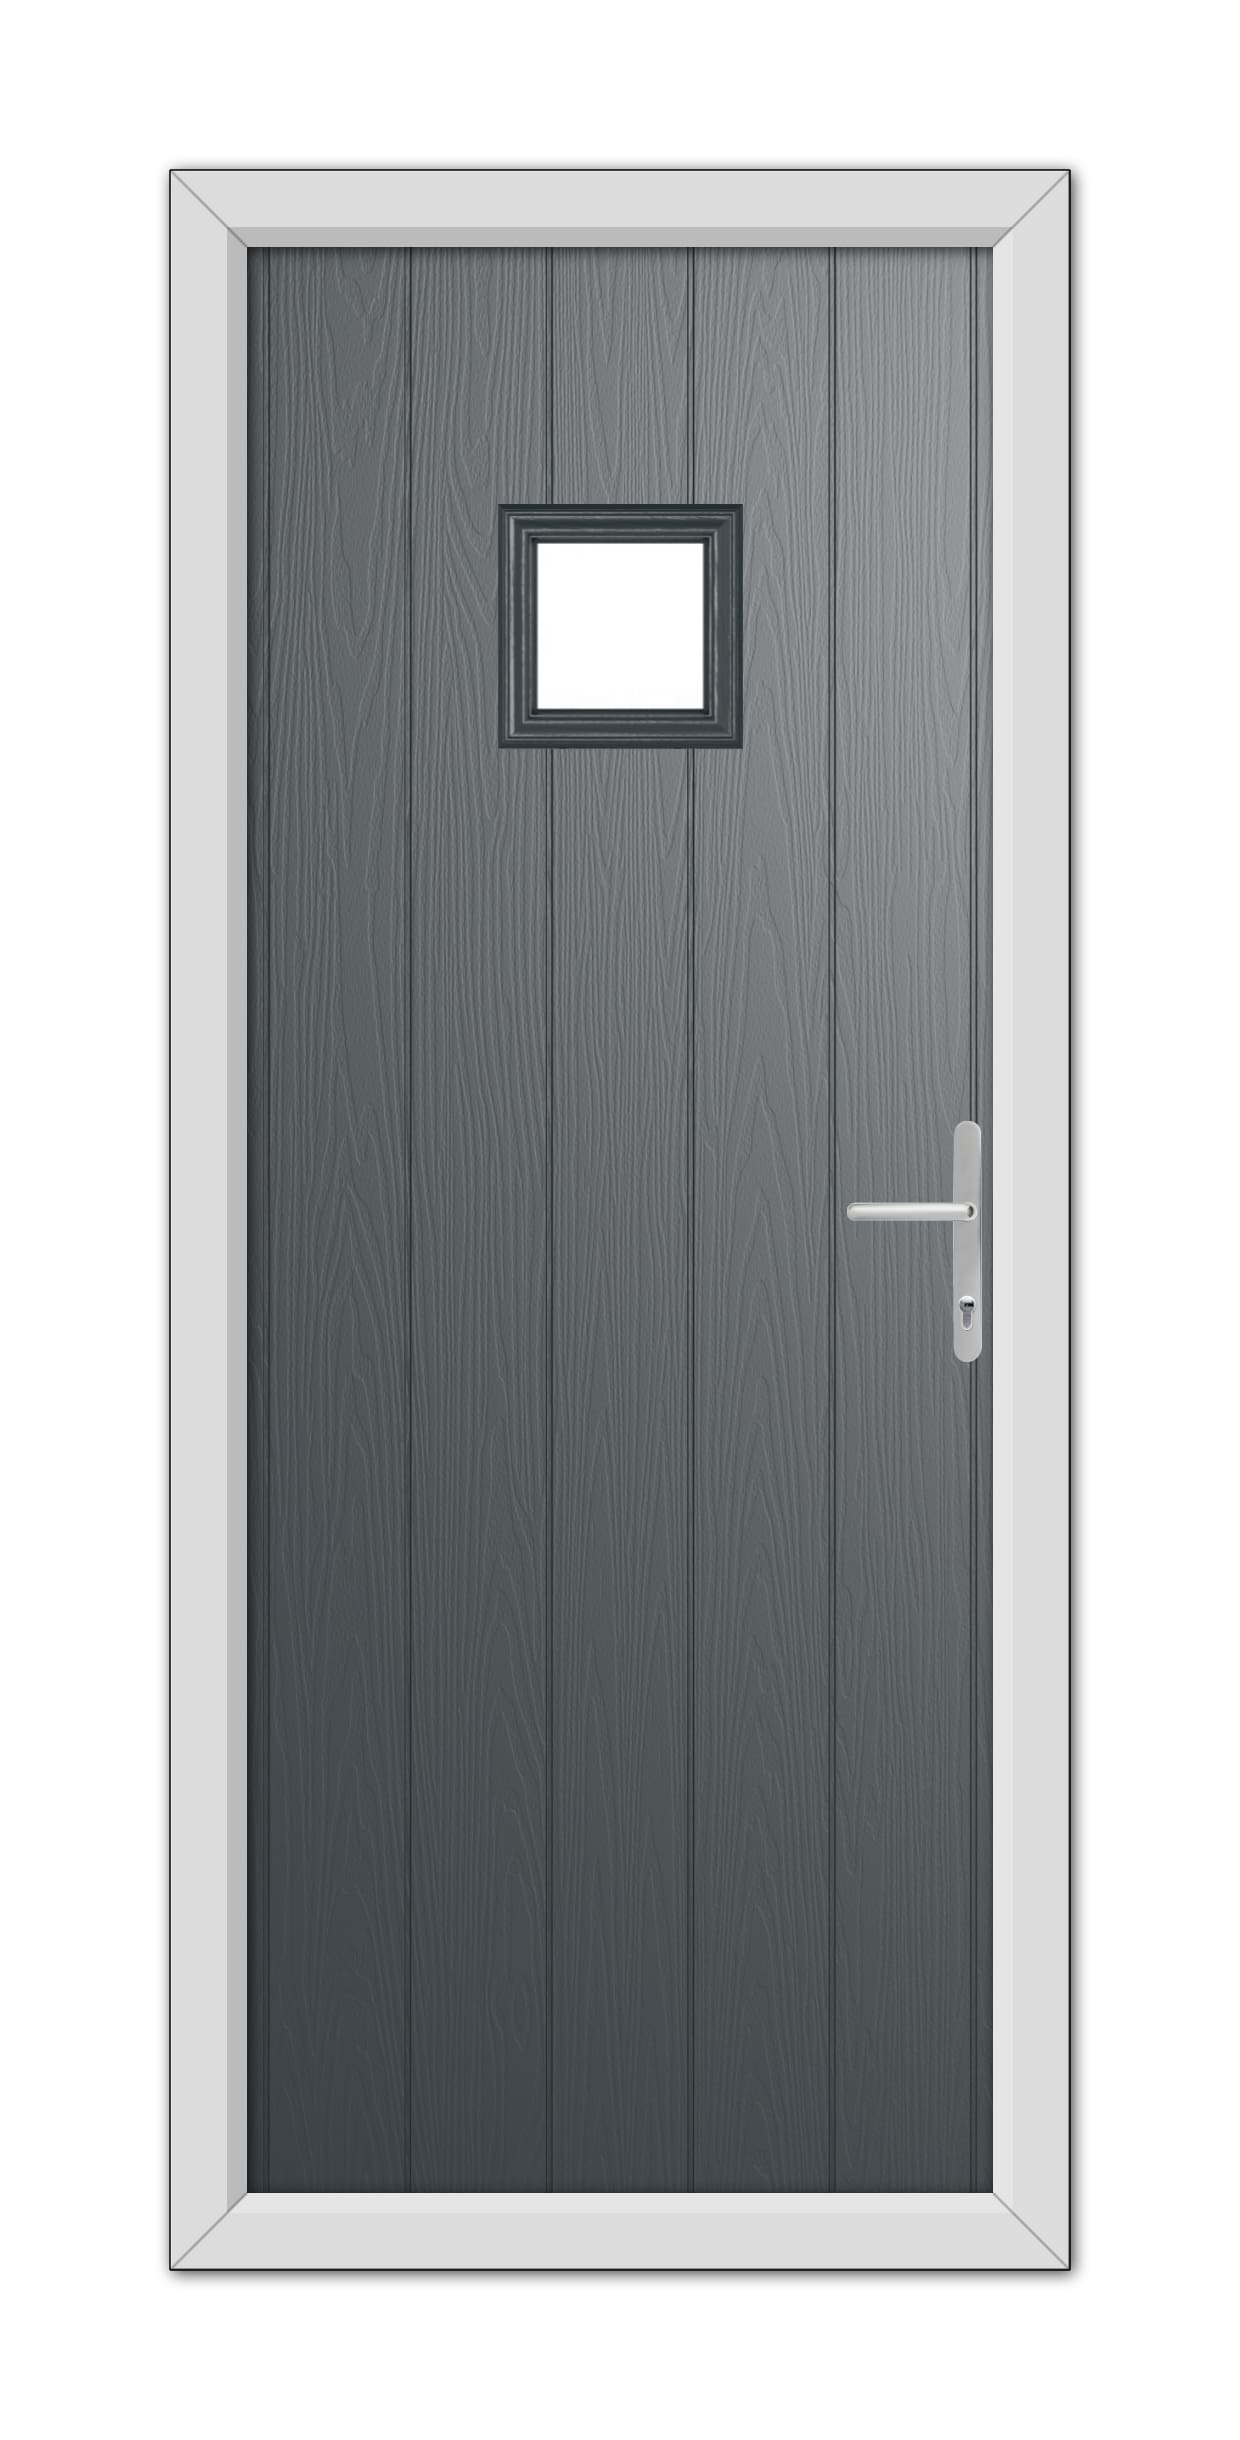 A modern Anthracite Grey Brampton Composite Door with a small rectangular window at the top, framed in white, and equipped with a metal handle on the right side.